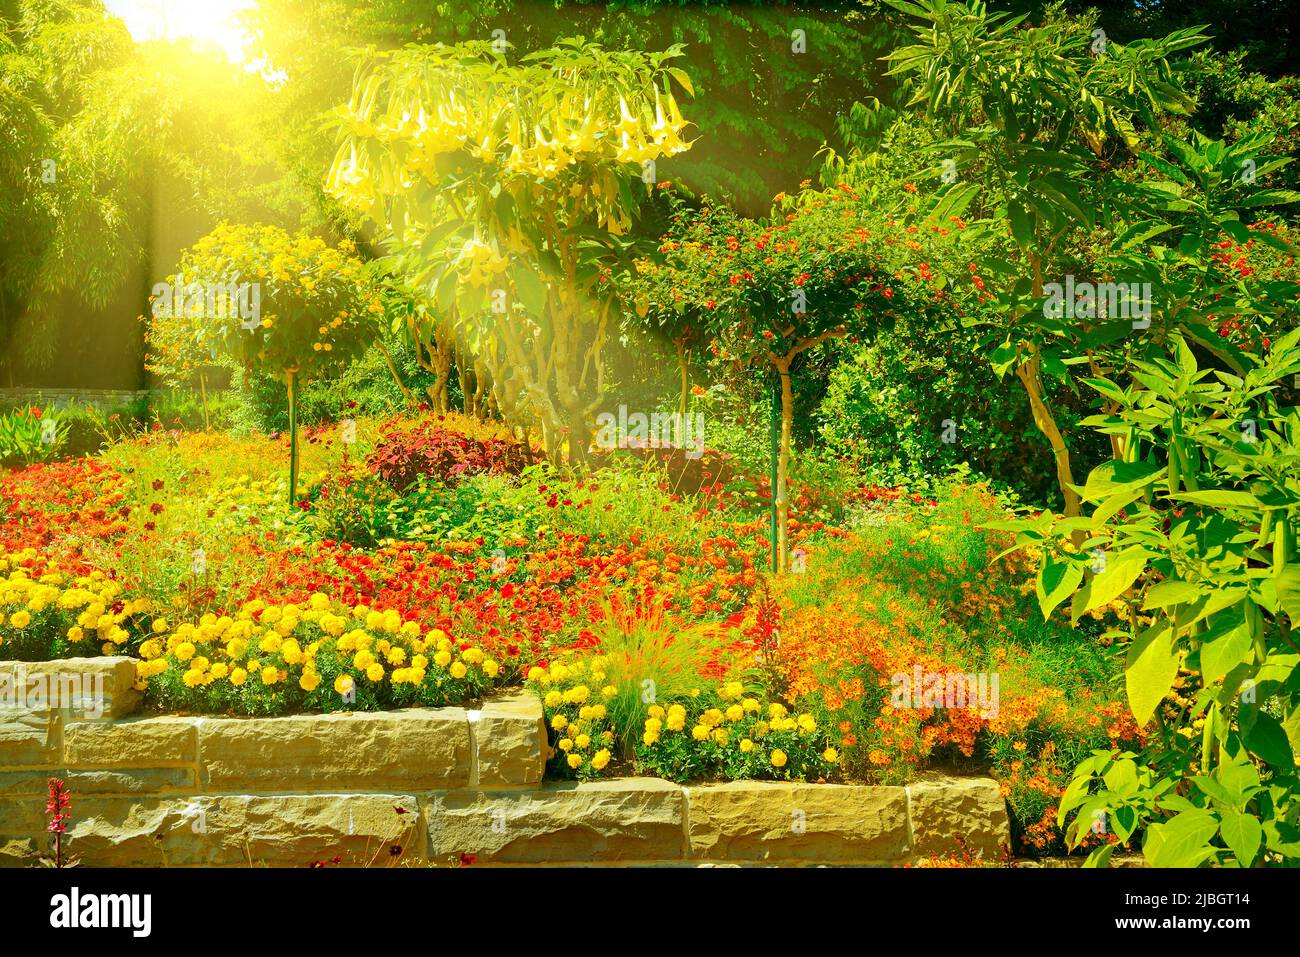 Bright flower bed with multi-colored flowers illuminated by the sun. Stock Photo